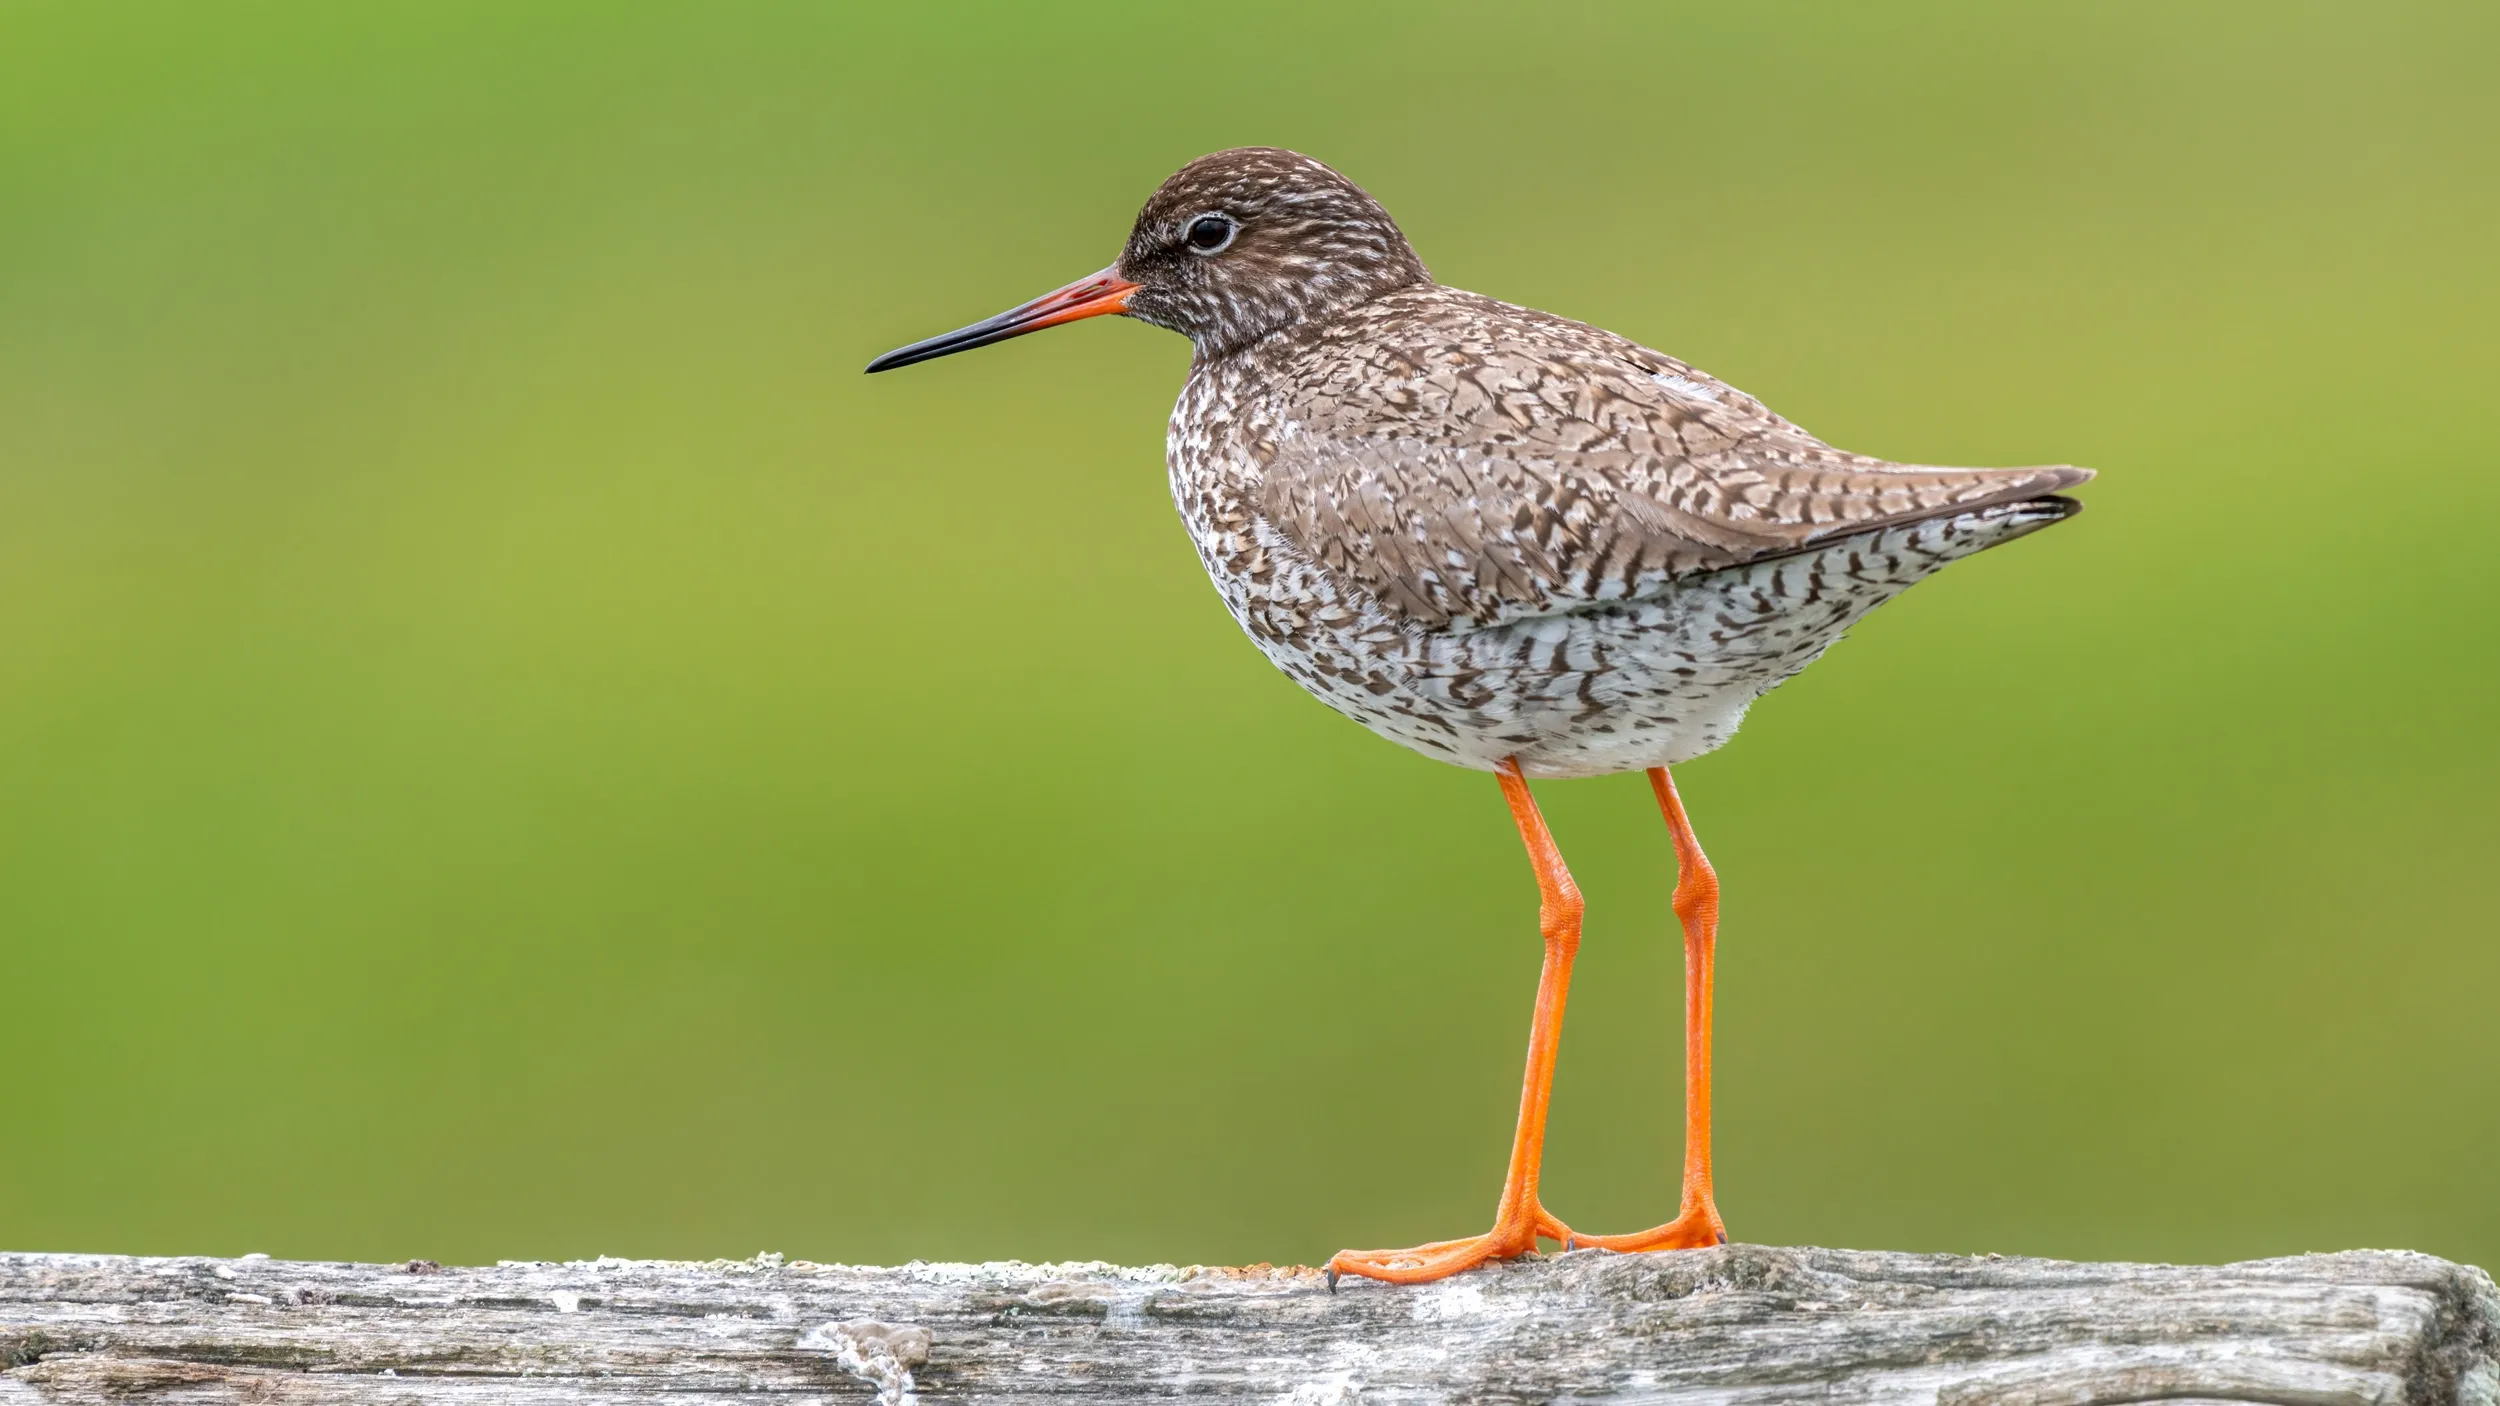 A lone Redshank stood on top of a log.